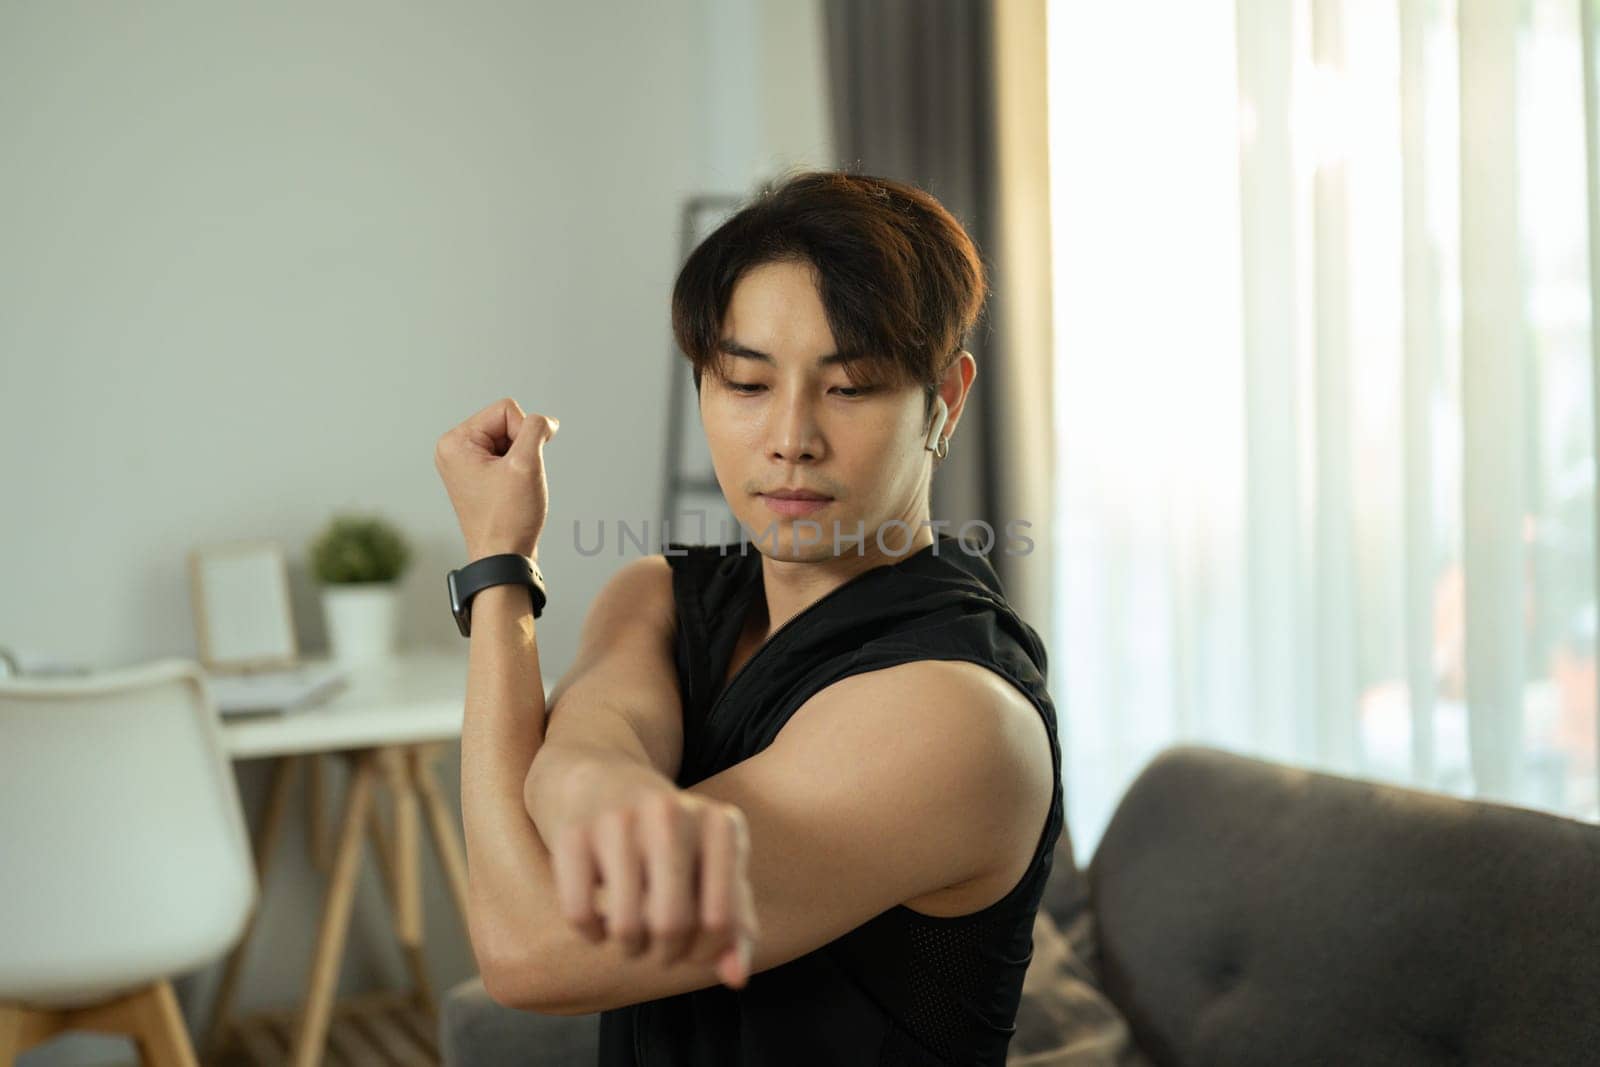 Asian man in sport outfit warming up in living room before workout. Healthy lifestyle and fitness concept.